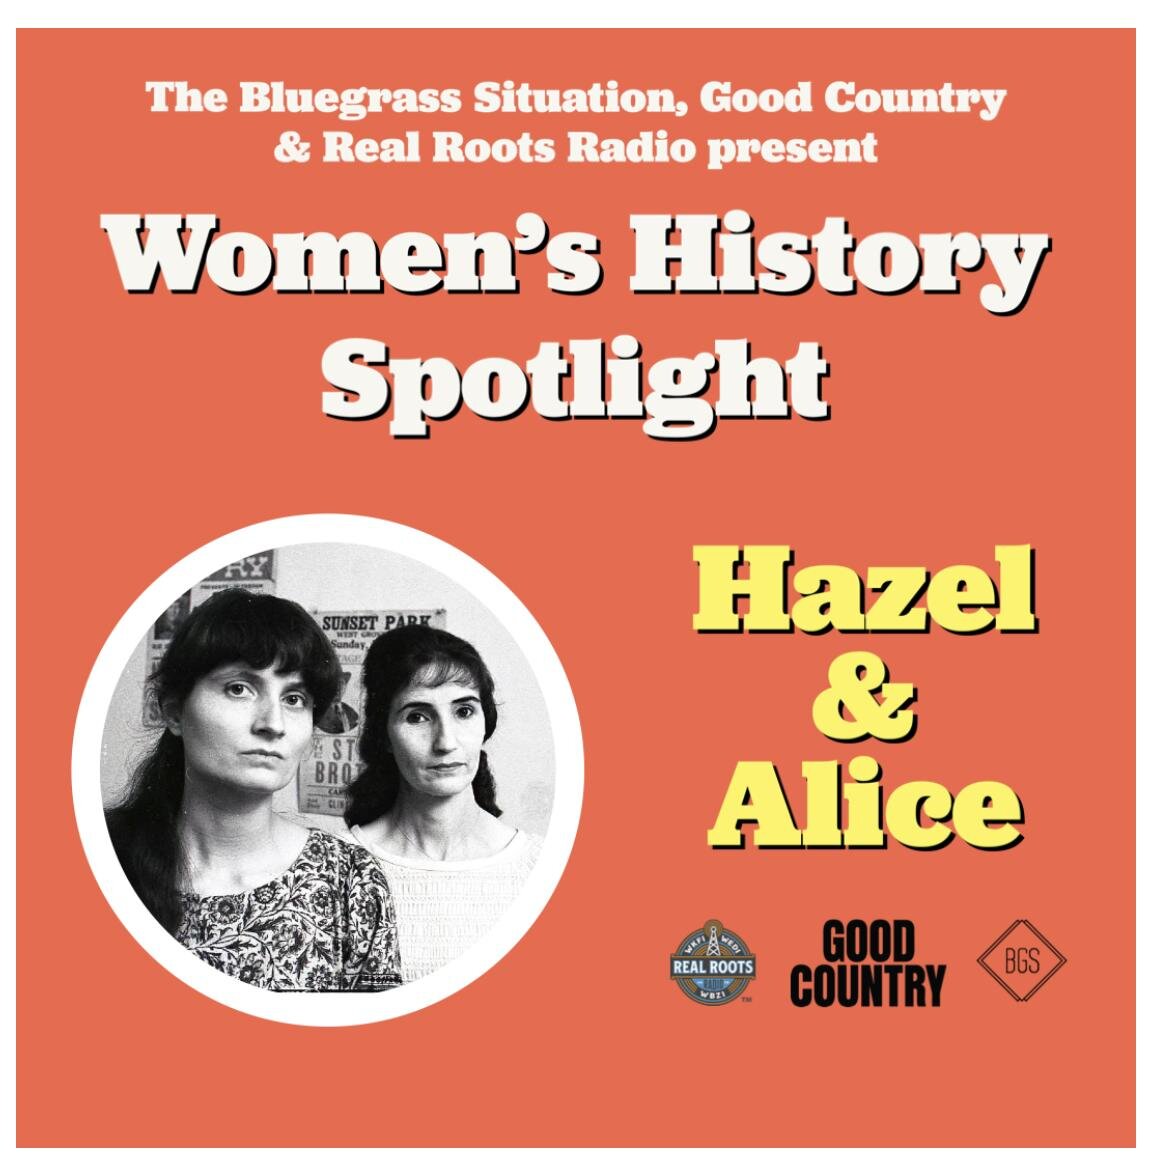 Members of the Bluegrass Music Hall of Fame, Hazel Dickens &amp; Alice Gerrard were an unlikely pair who blasted down doors for women in bluegrass. Hazel hailed from the mountains of West Virginia, while Alice was from across the country in Seattle, 